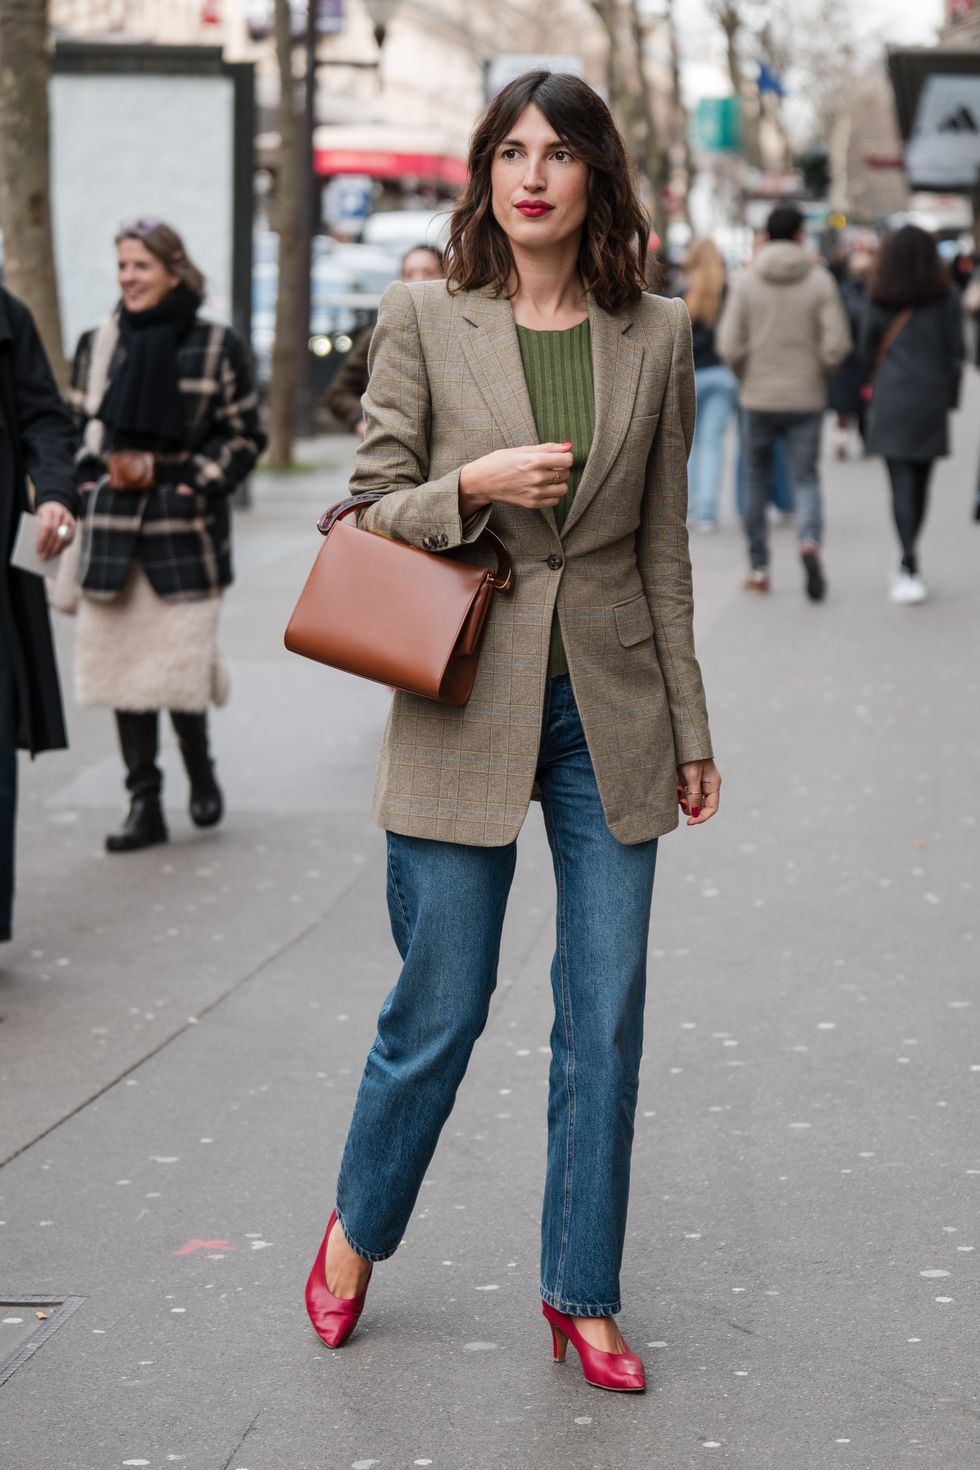 paris, france february 28 jeanne damas wears green top, beige checked blazer, jeans, brown bag, red heels, outside dries van noten, during the womenswear fallwinter 20242025 as part of paris fashion week on february 28, 2024 in paris, france photo by claudio laveniagetty images